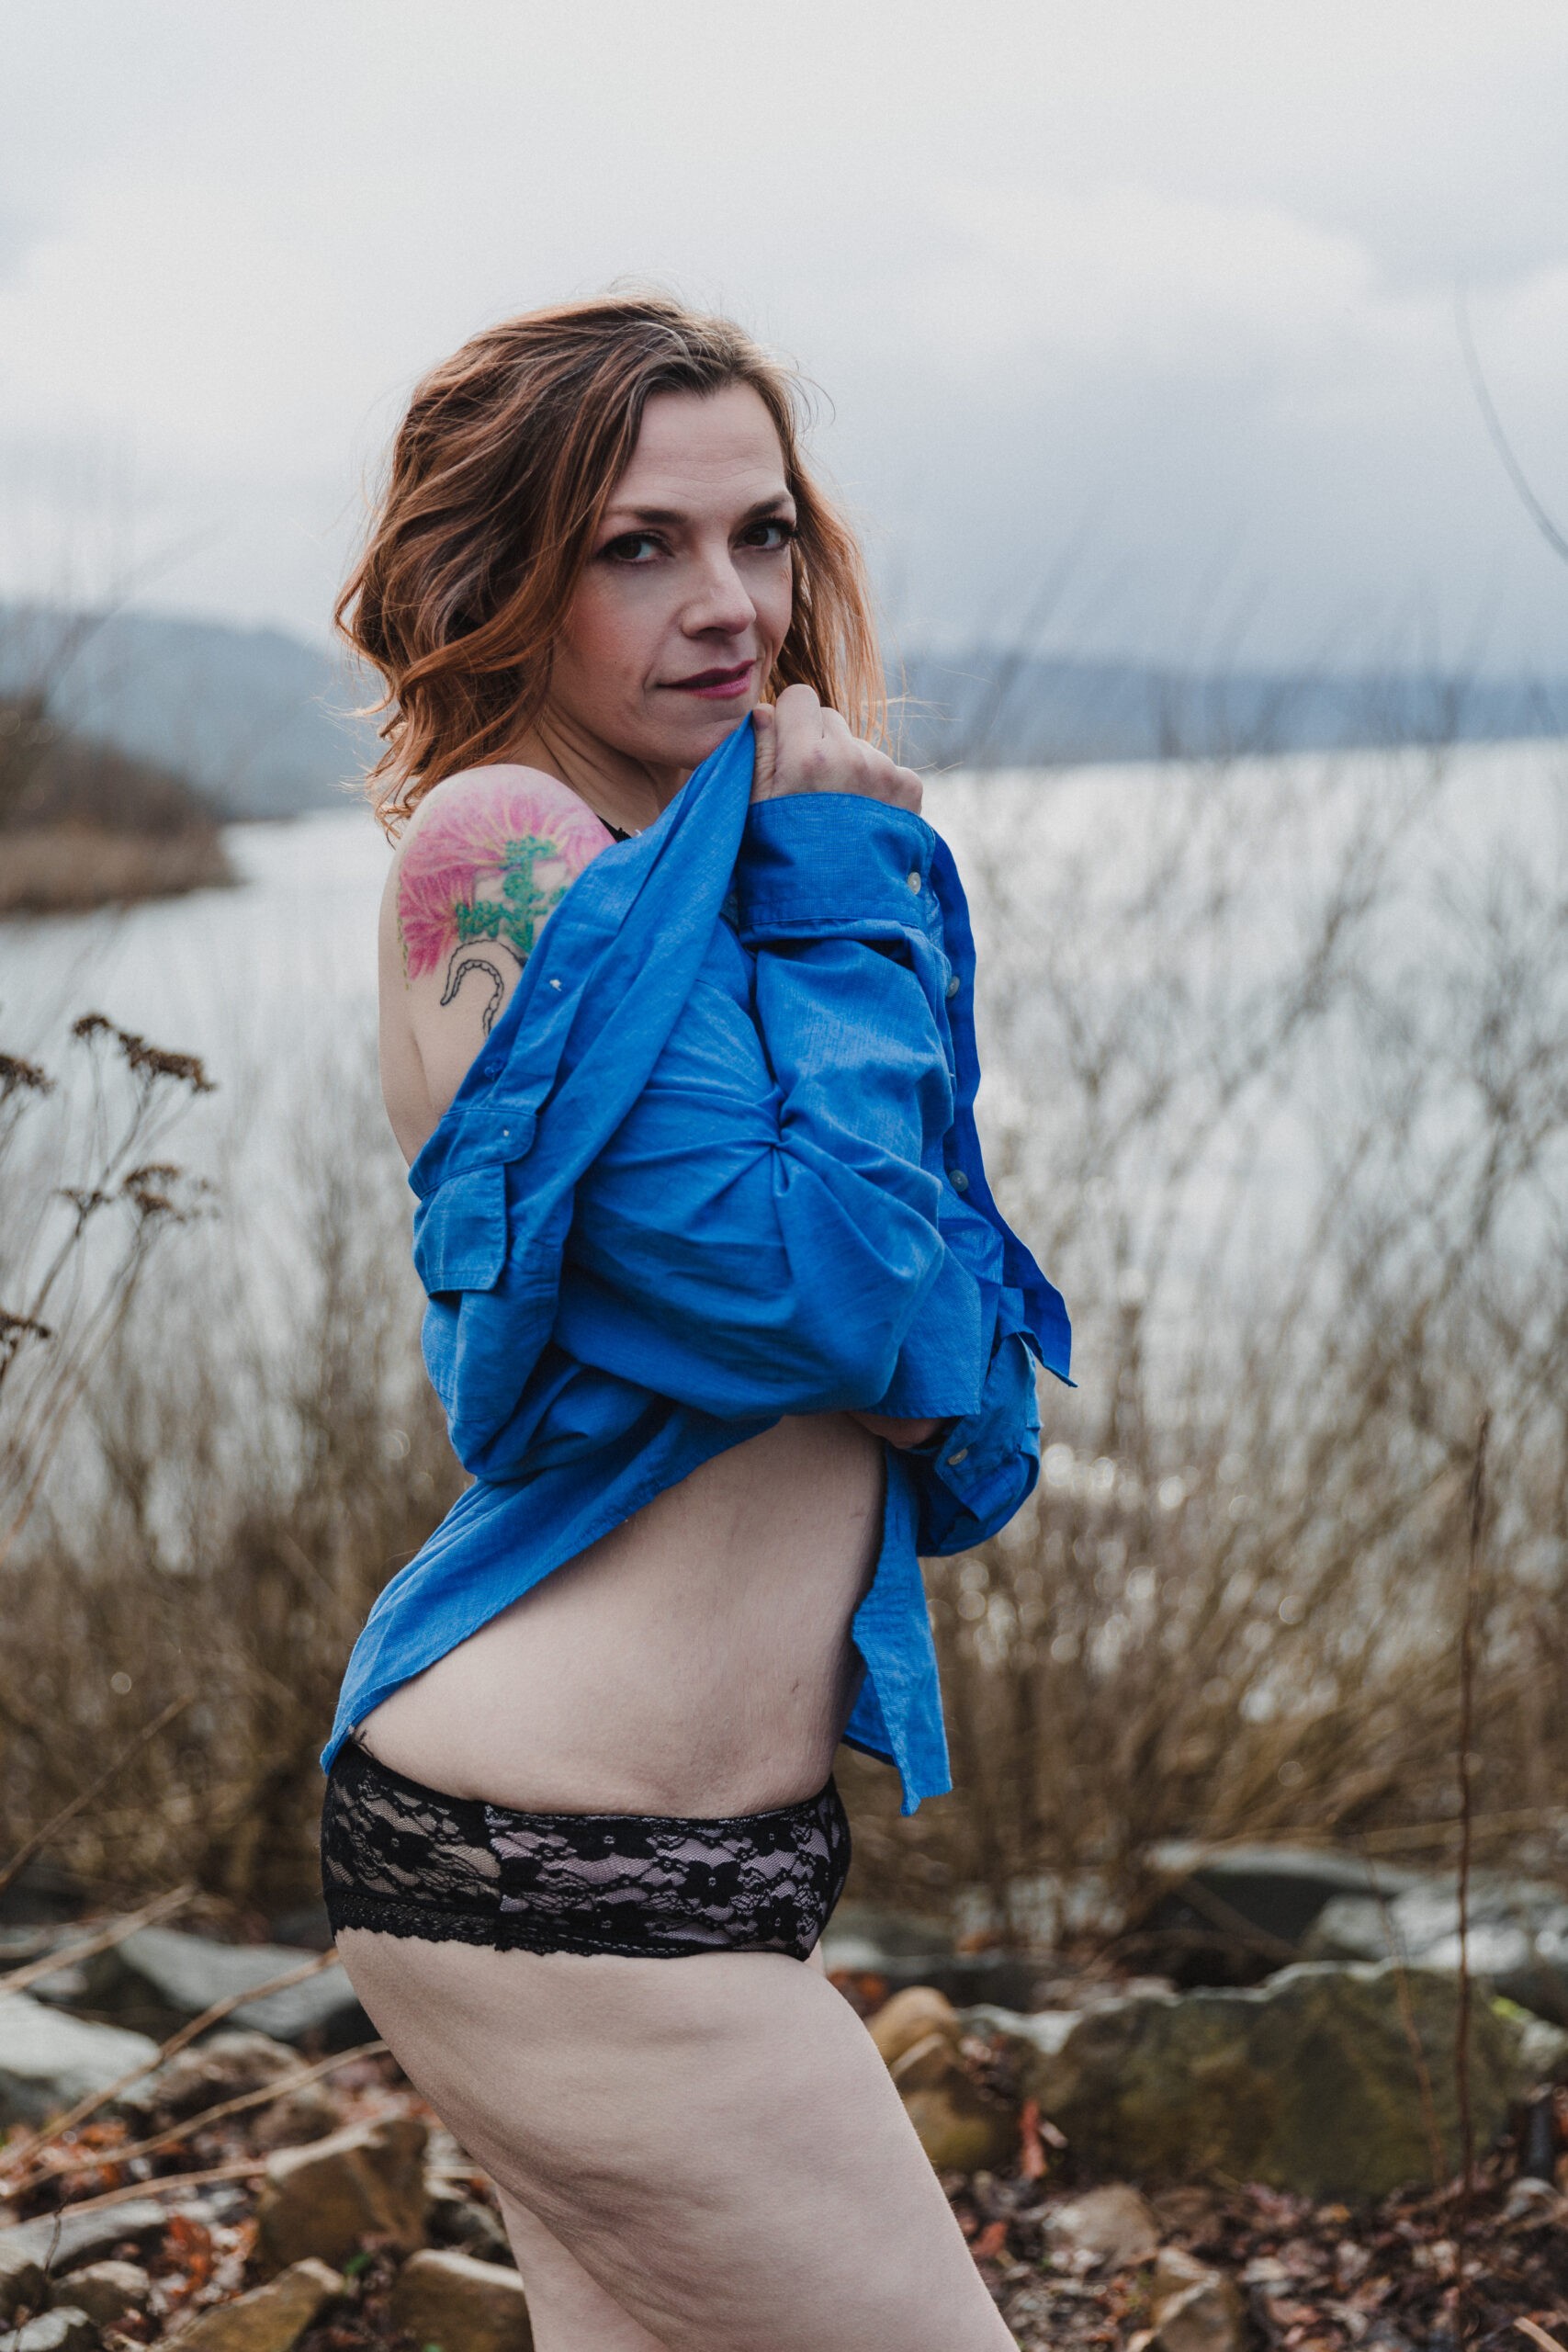 Holli outdoor field lake blue shirt black underwear outdoor session red head strawberry blonde looking into camera small petite loose skin stretch marks beautiful white woman